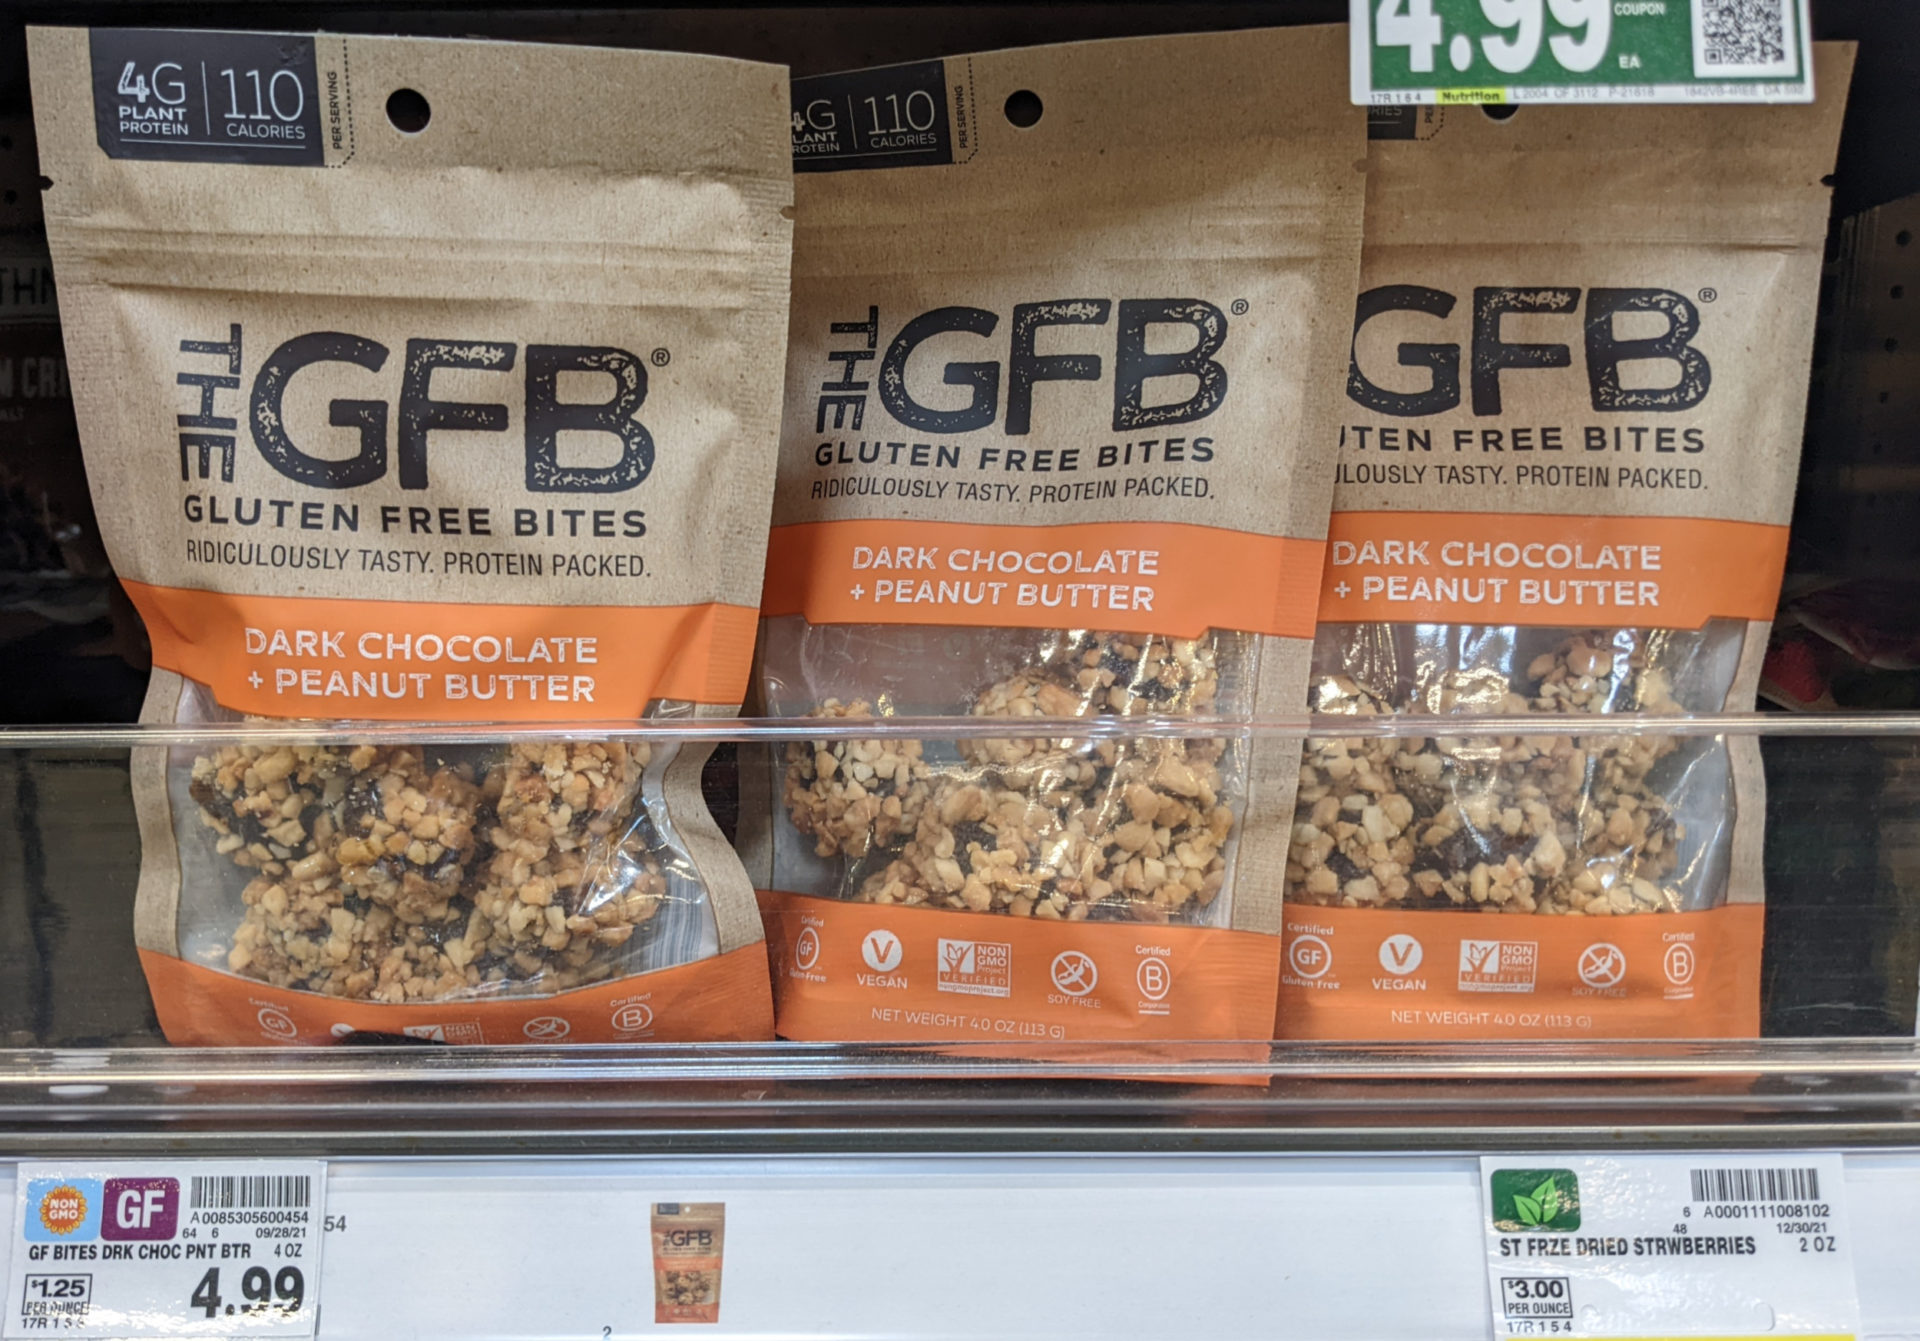 Grab The GFB Gluten Free Bites As Low As $3.24 At Kroger